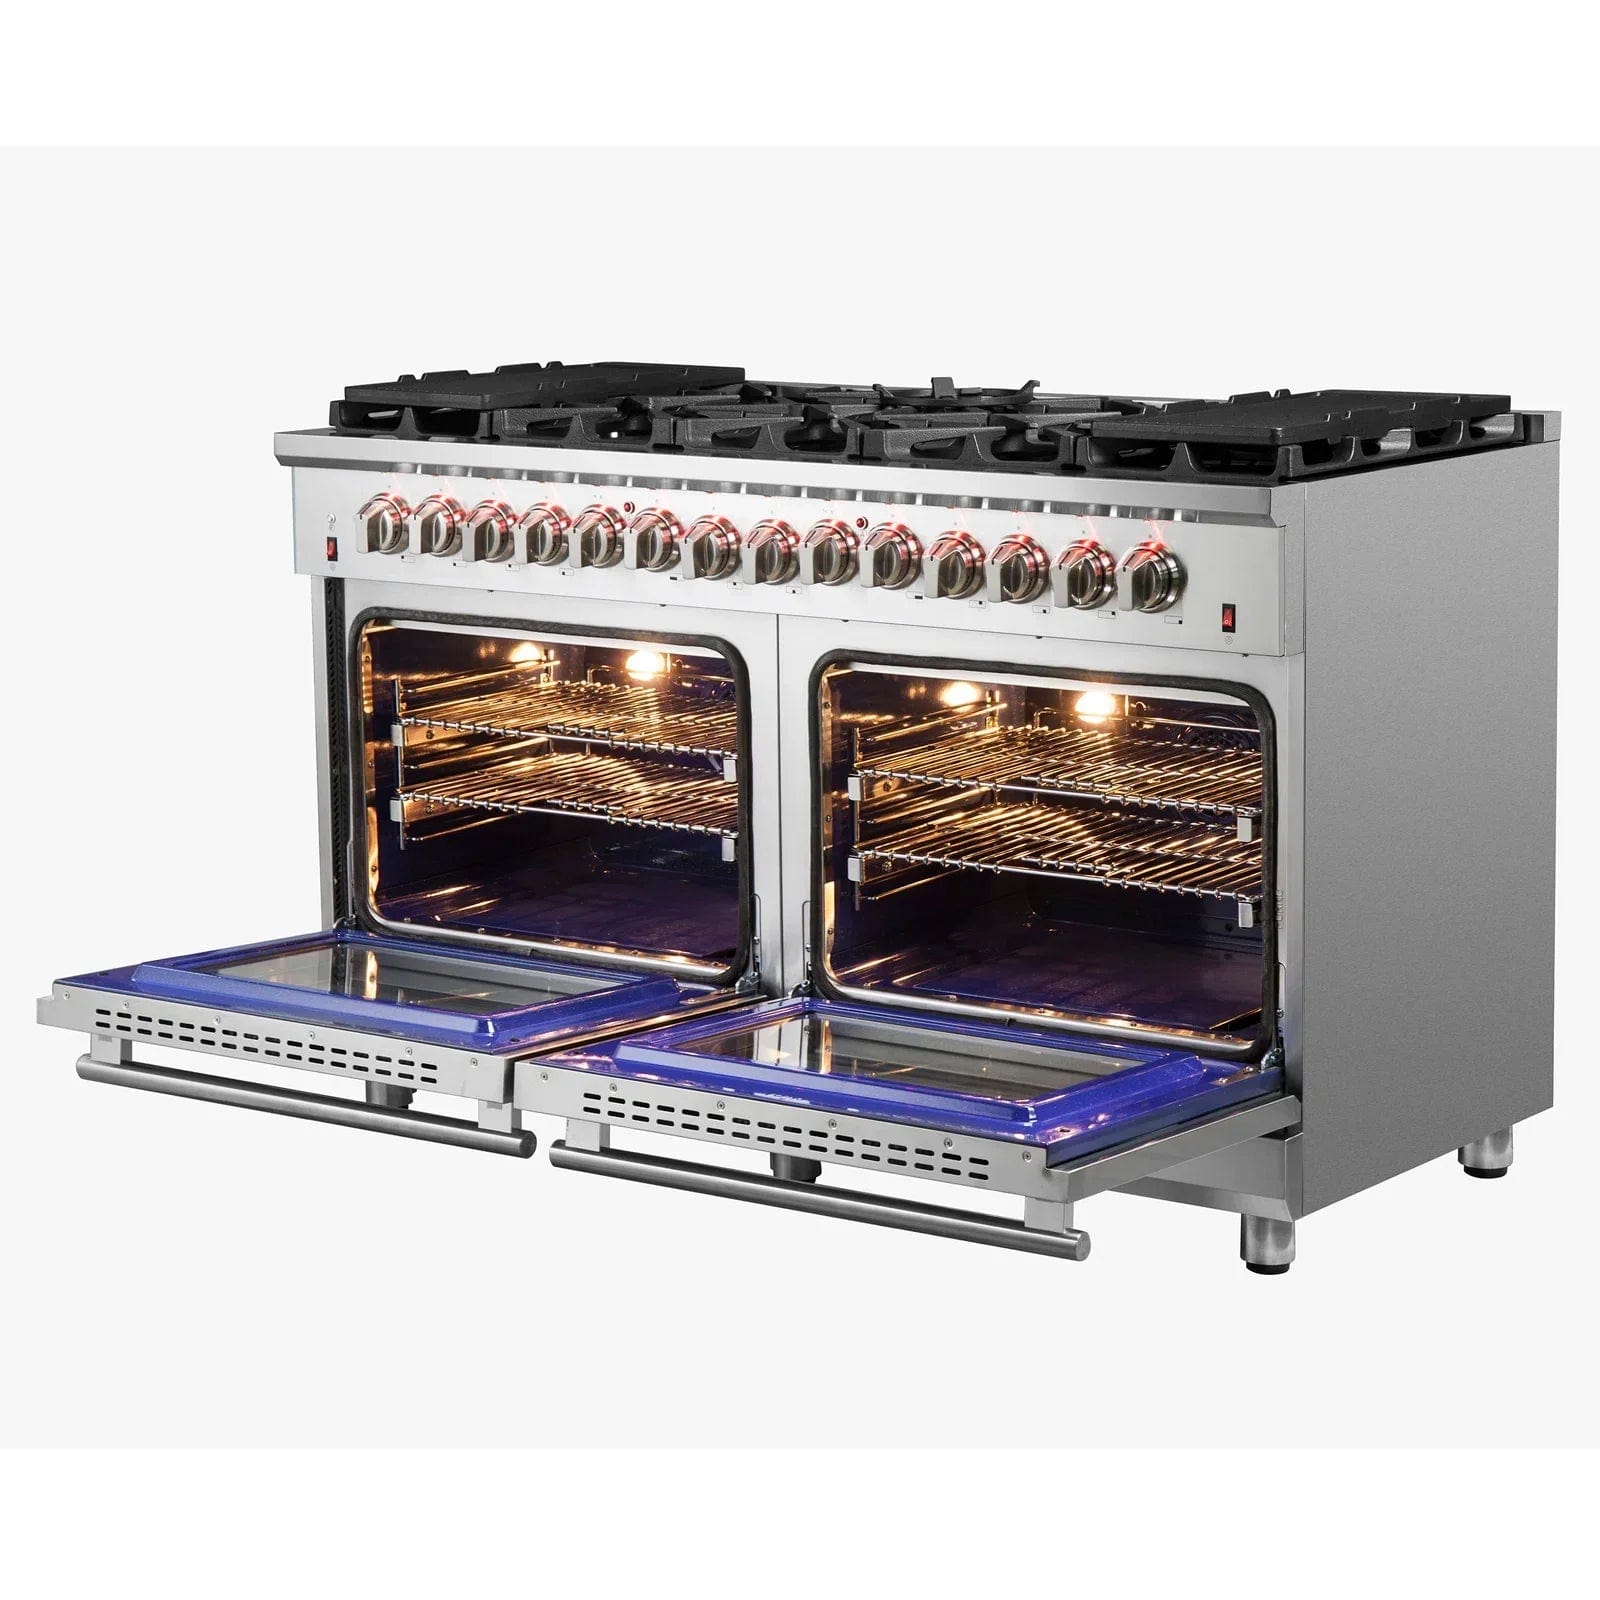 Forno Massimo 60″ Freestanding Dual Fuel Range with 10 Burners, FFSGS6125-60 Ranges FFSGS6125-60 Luxury Appliances Direct